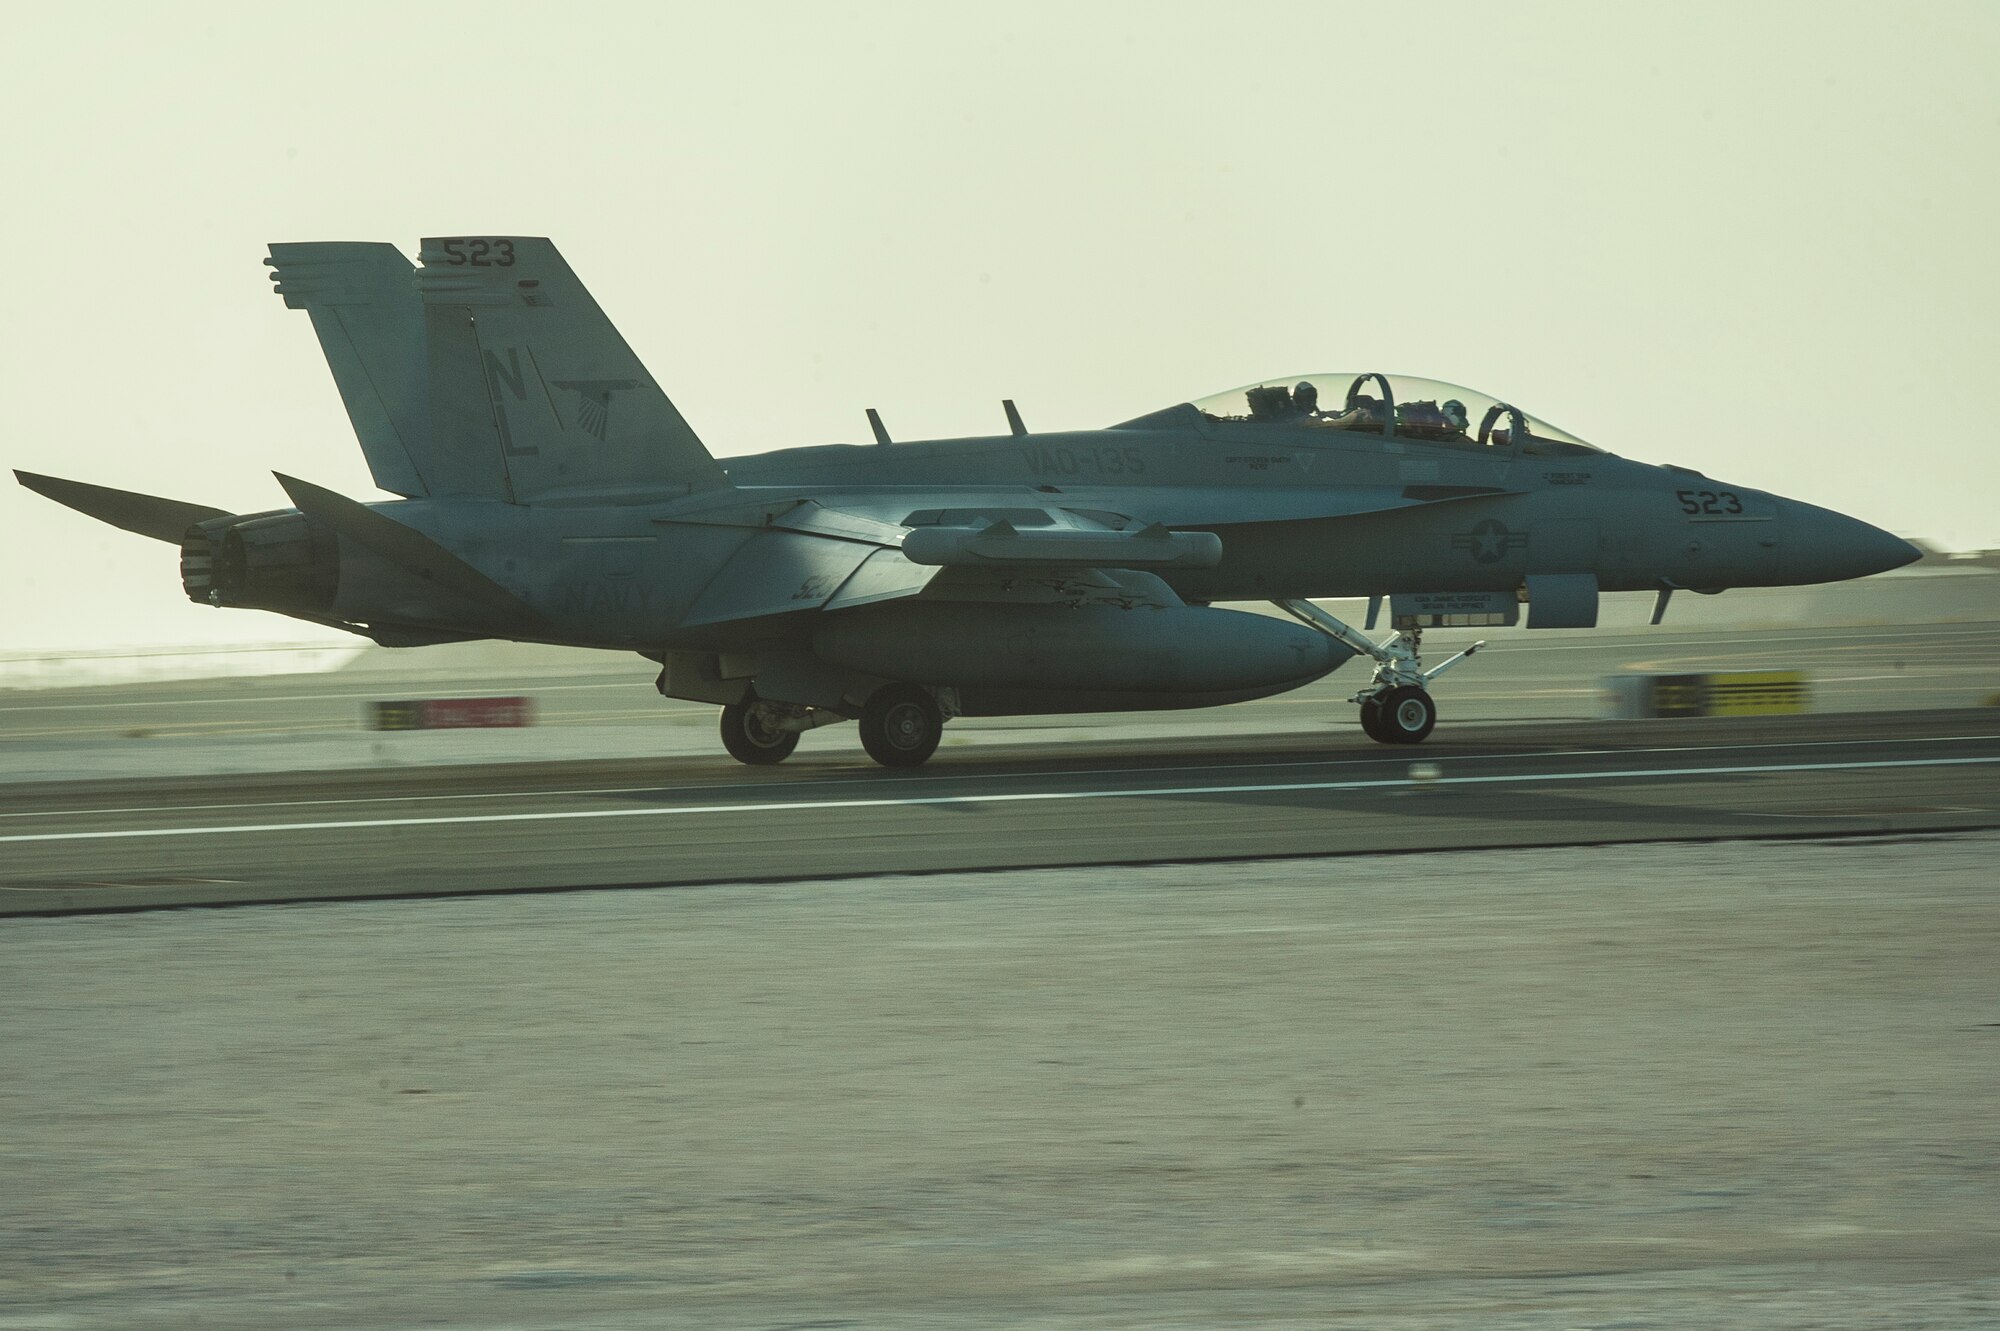 An EA-18G Growler assigned to the Electronic Attack Squadron 135 (VAQ-135) “Black Ravens” arrives at Al Udeid Air Base, Qatar, Oct. 30, 2018. The electronic warfare aircraft has electronic attack, jamming, and satellite communication capabilities as well as communication countermeasures. VAQ-135 will replace VMAQ-2, which operated EA-6B Prowlers. VAQ-135 is deployed to the U.S. 5th Fleet area of operations in support of naval operations to ensure maritime stability and security in the Central Region, connecting the Mediterranean and the Pacific through the western Indian Ocean and three strategic choke points. (U.S. Air Force photo by Tech. Sgt. Christopher Hubenthal)